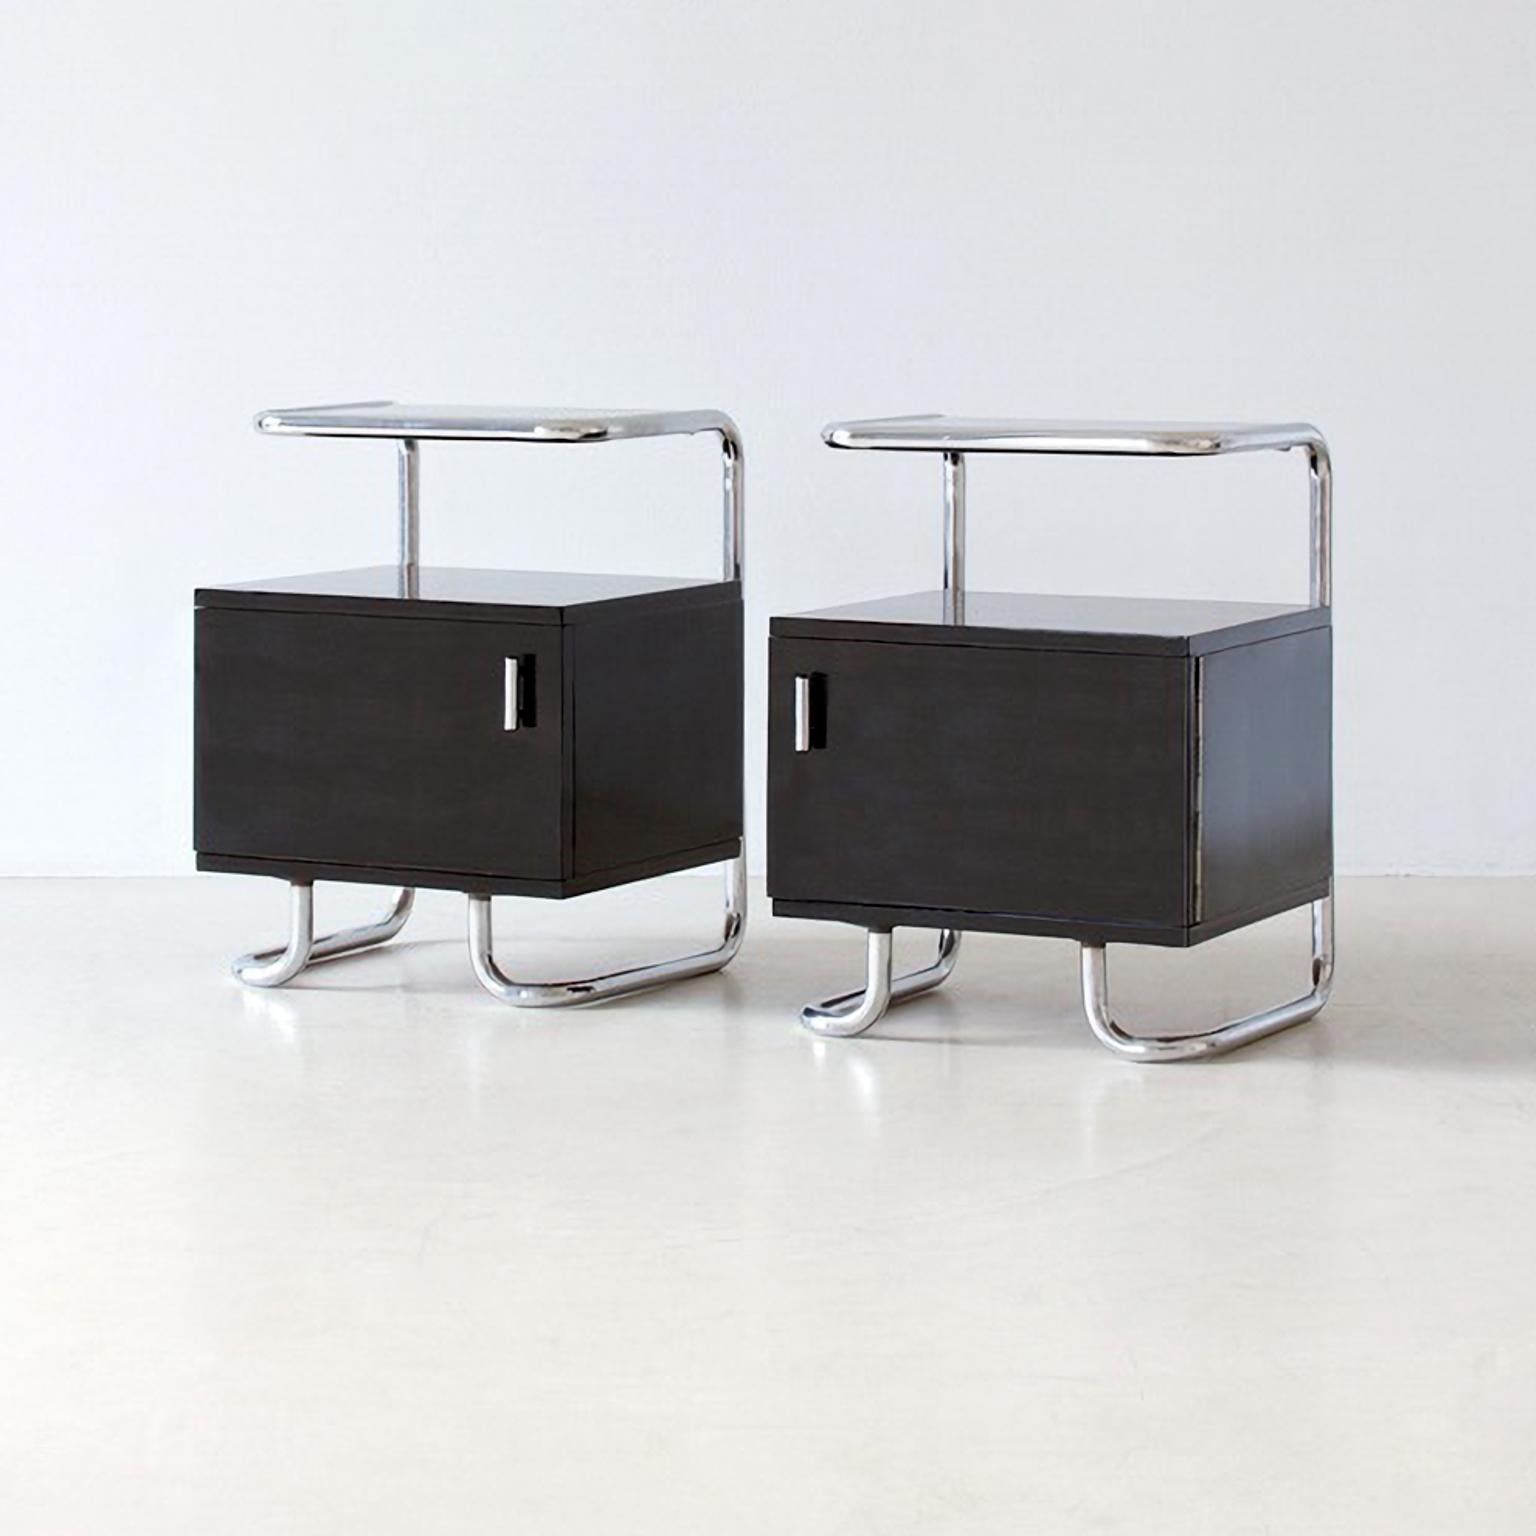 Modernist bedside cabinets pair in black glossy lacquered wood and chromium plated tubular steel, circa 1930